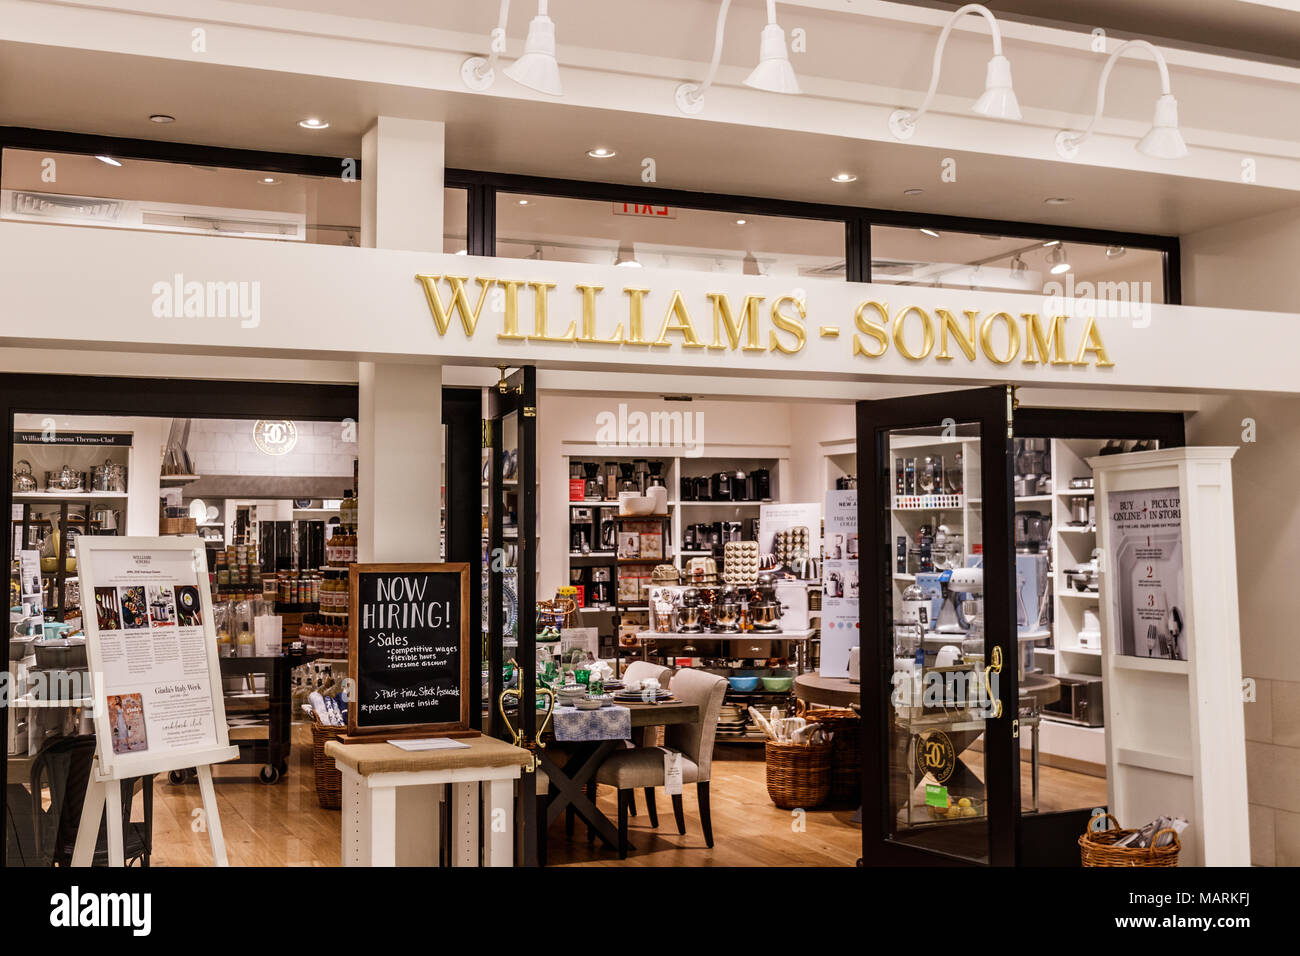 479 Williams Sonoma Images, Stock Photos, 3D objects, & Vectors